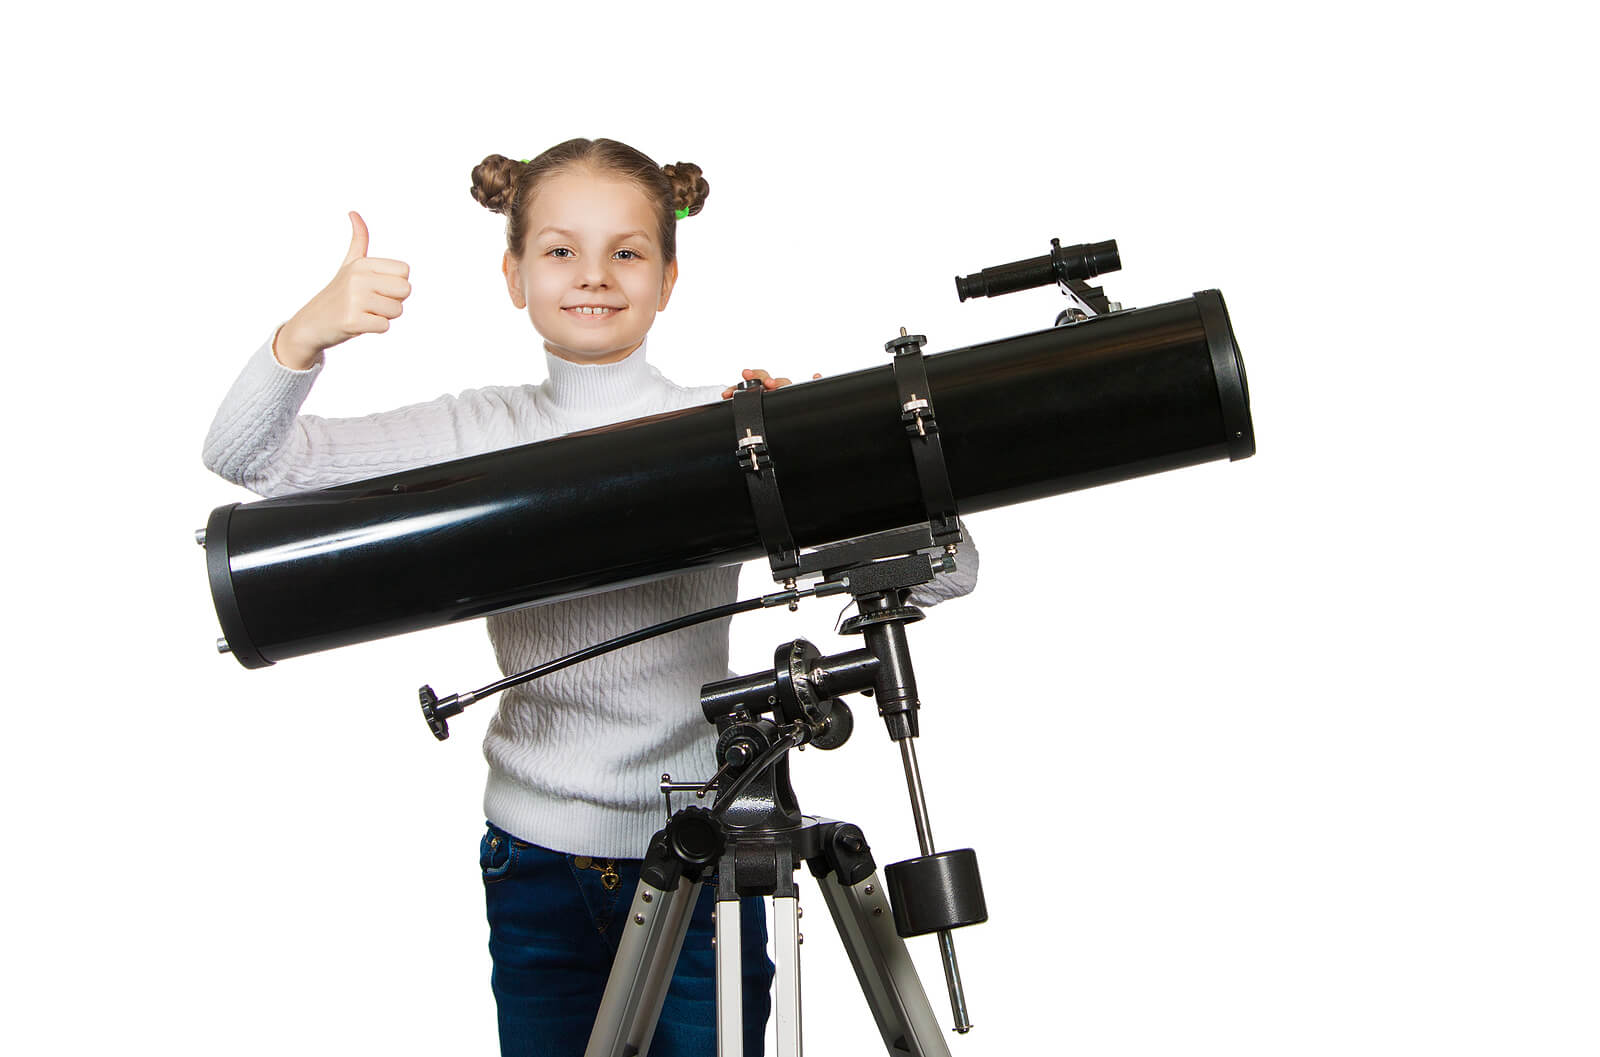 A young girl using a large telescope.